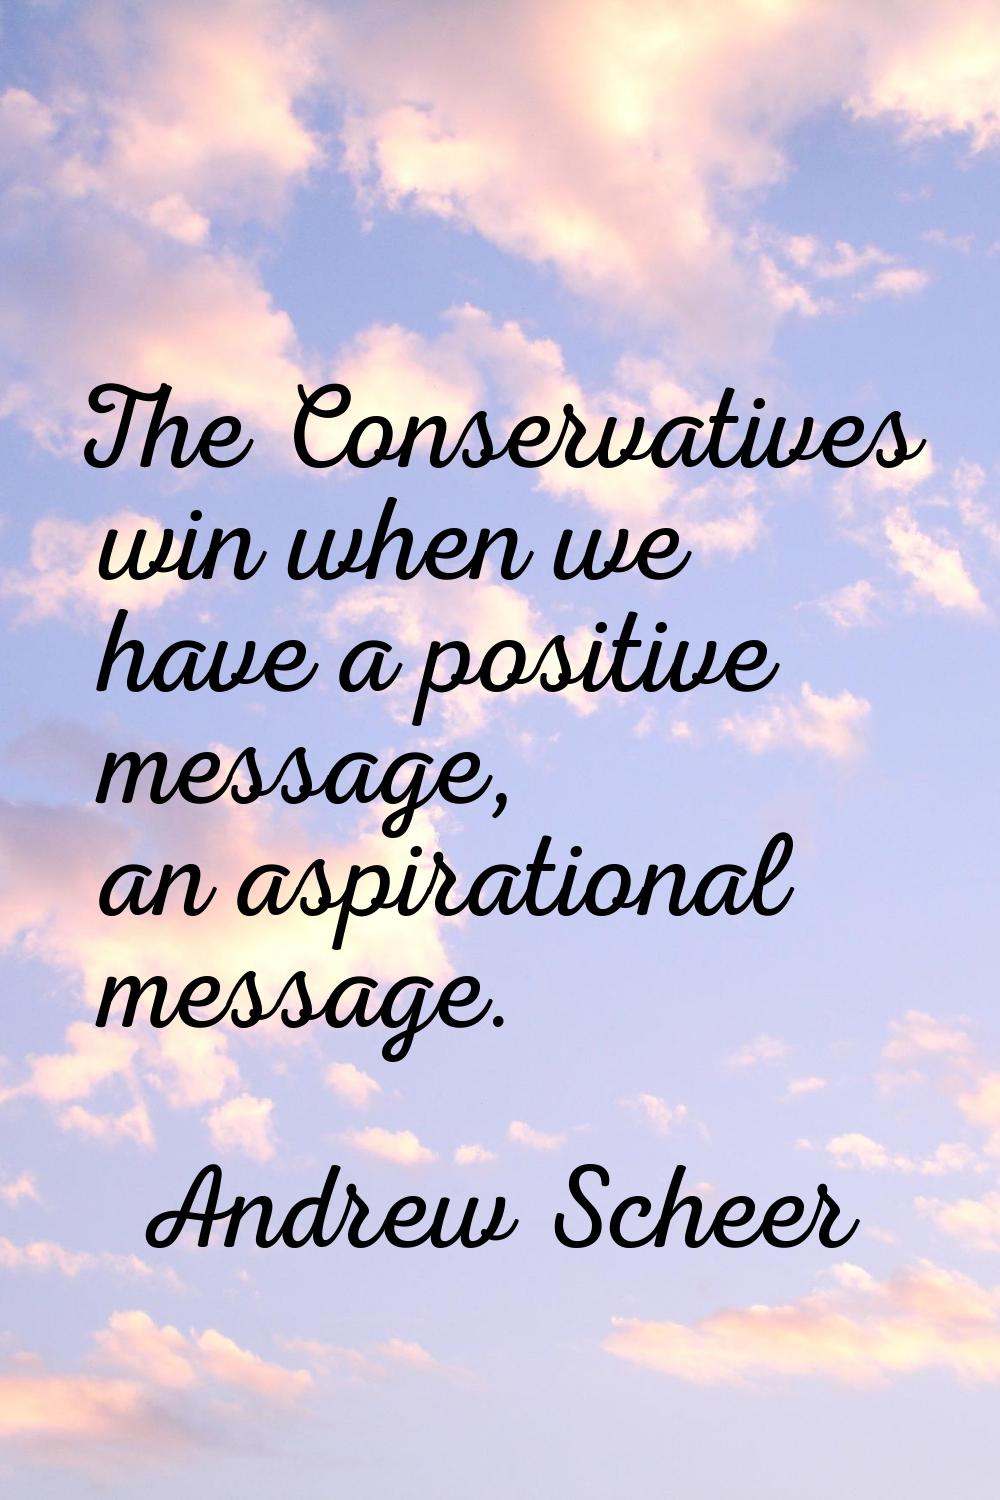 The Conservatives win when we have a positive message, an aspirational message.